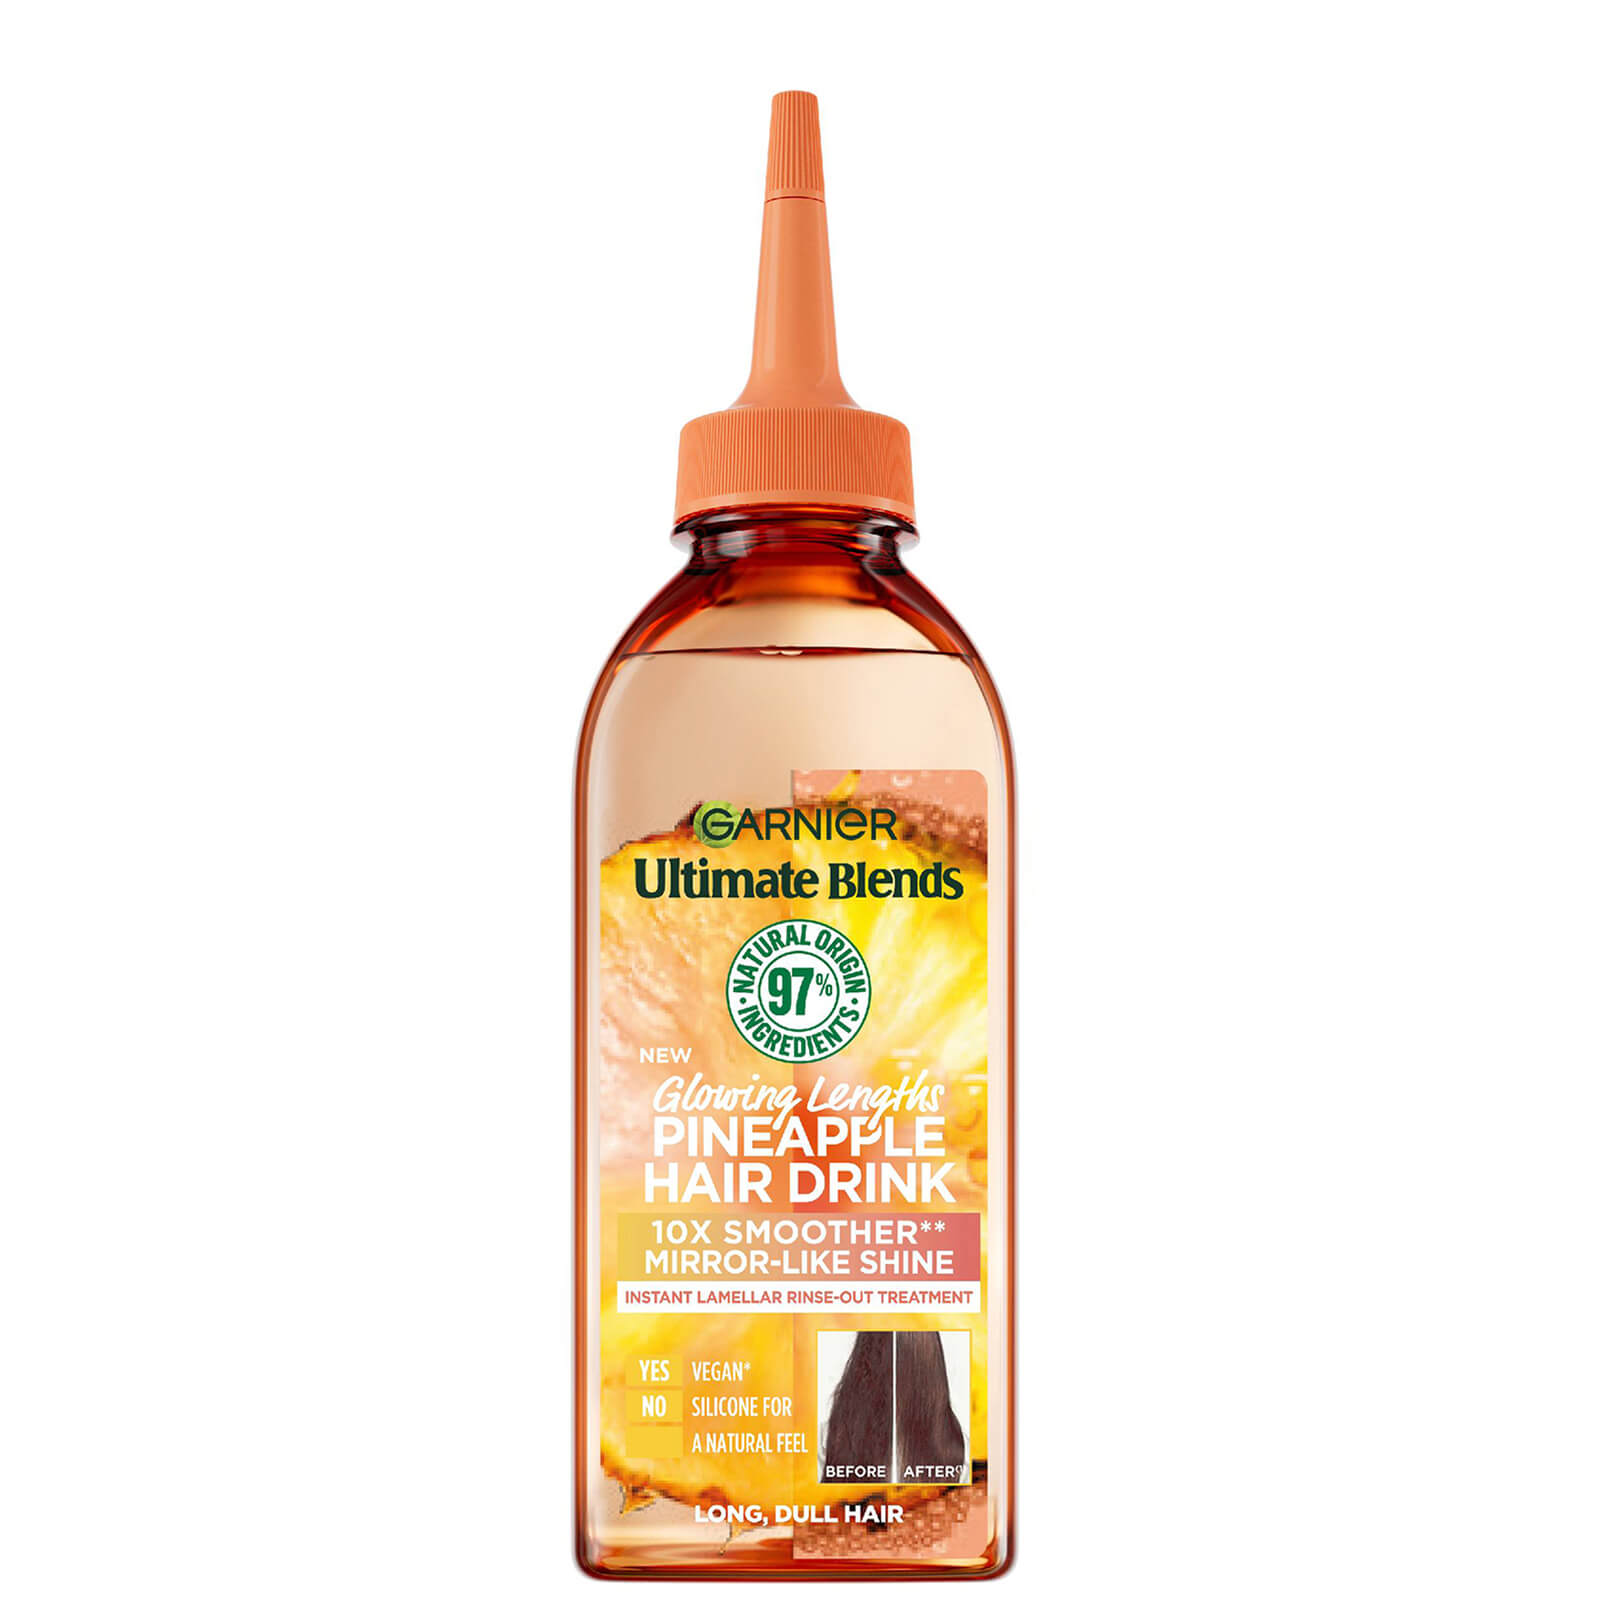 Garnier Ultimate Blends Glowing Lengths Pineapple Hair Drink Liquid Conditioner for Long Dull Hair 2